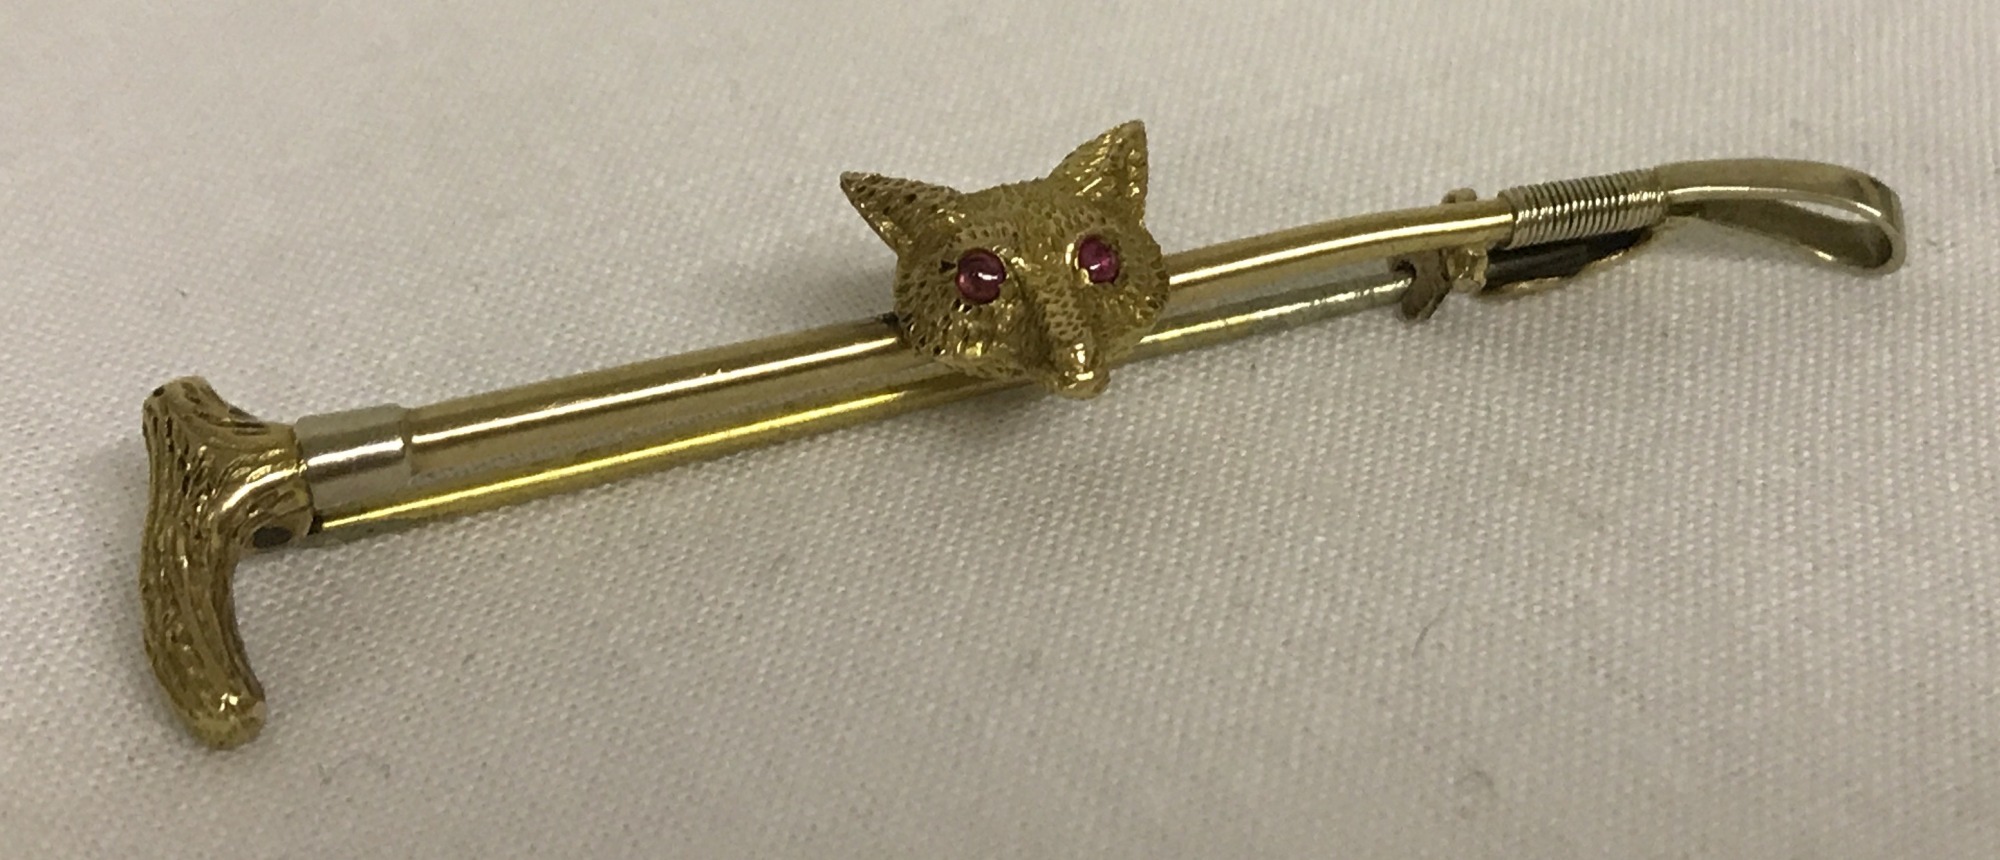 A 9ct gold riding crop and foxes head brooch. Foxes head set with 2 small rubies for eyes.